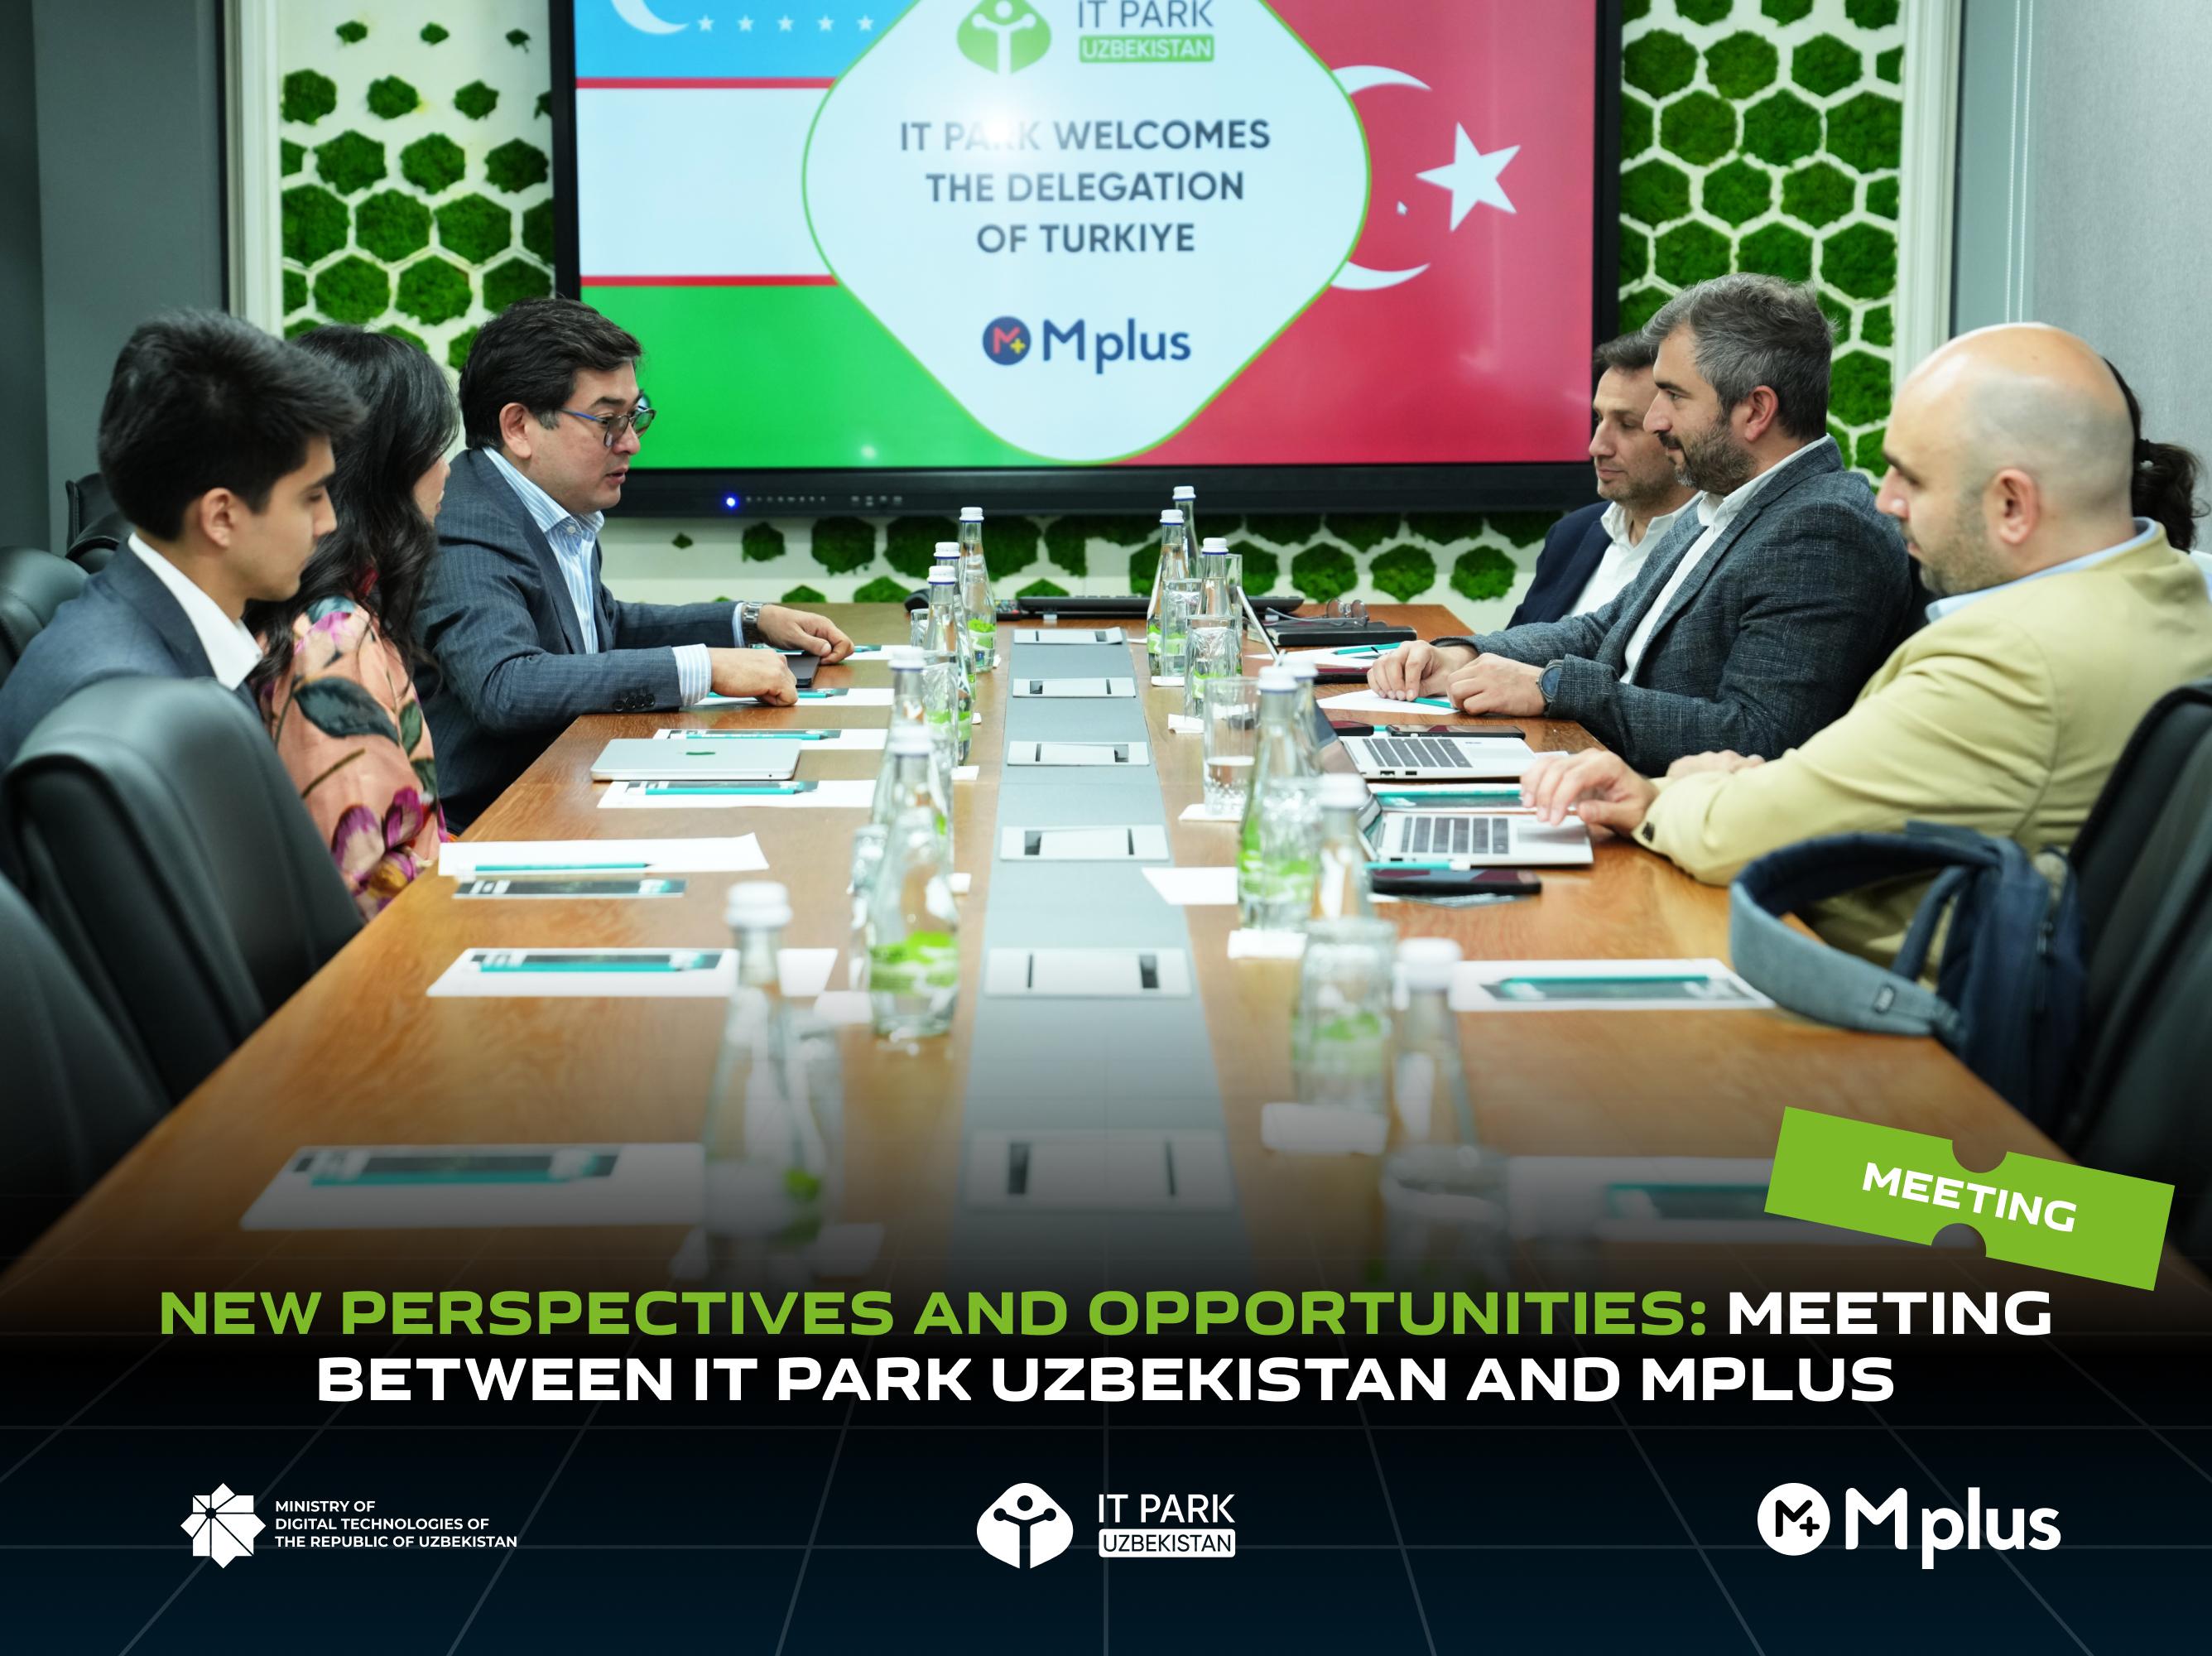 New Perspectives and Opportunities: Important Meeting between IT Park Uzbekistan and Mplus